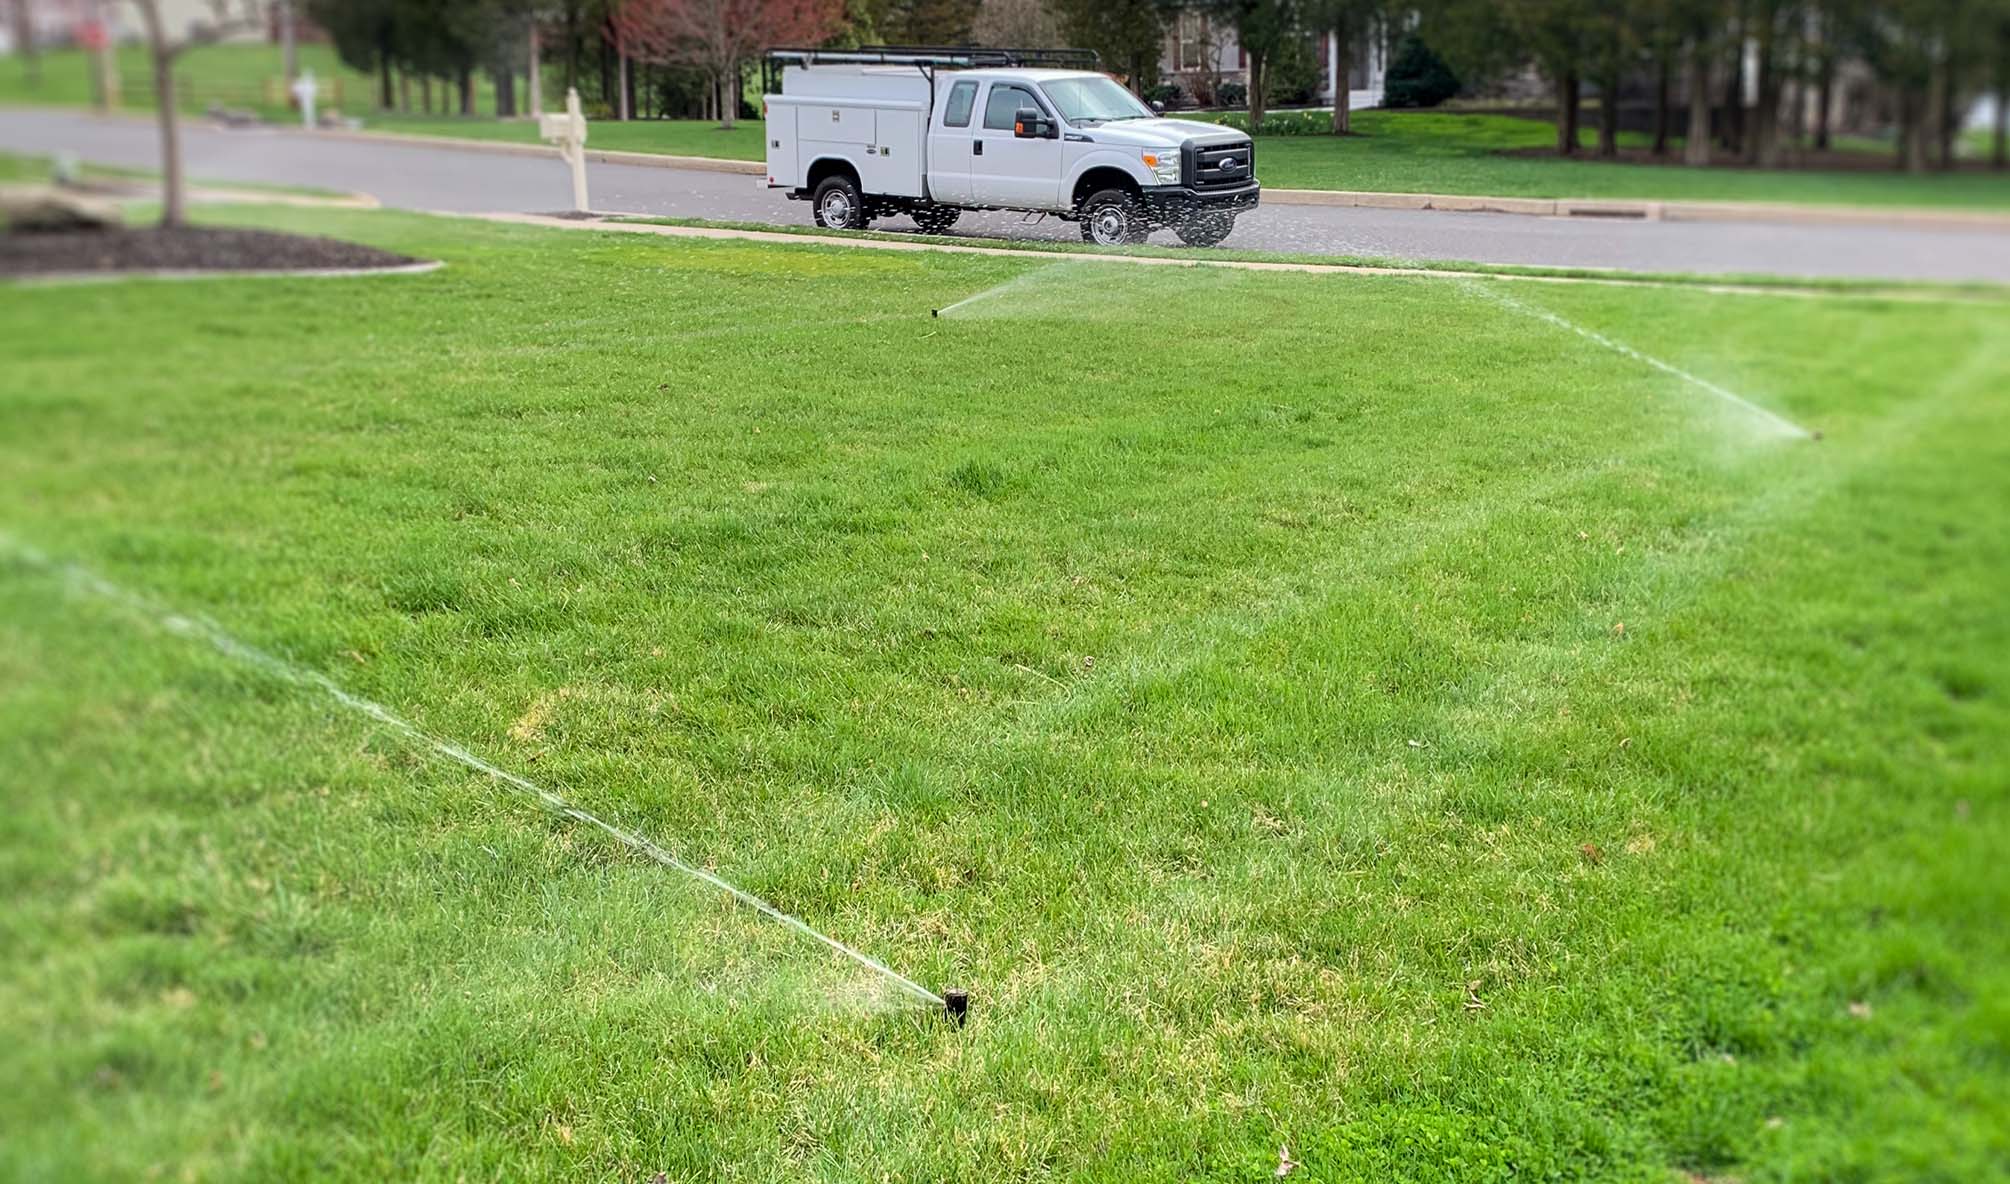 Sprinkler Irrigation Turned On In A Yard With A Truck Parked Out Front